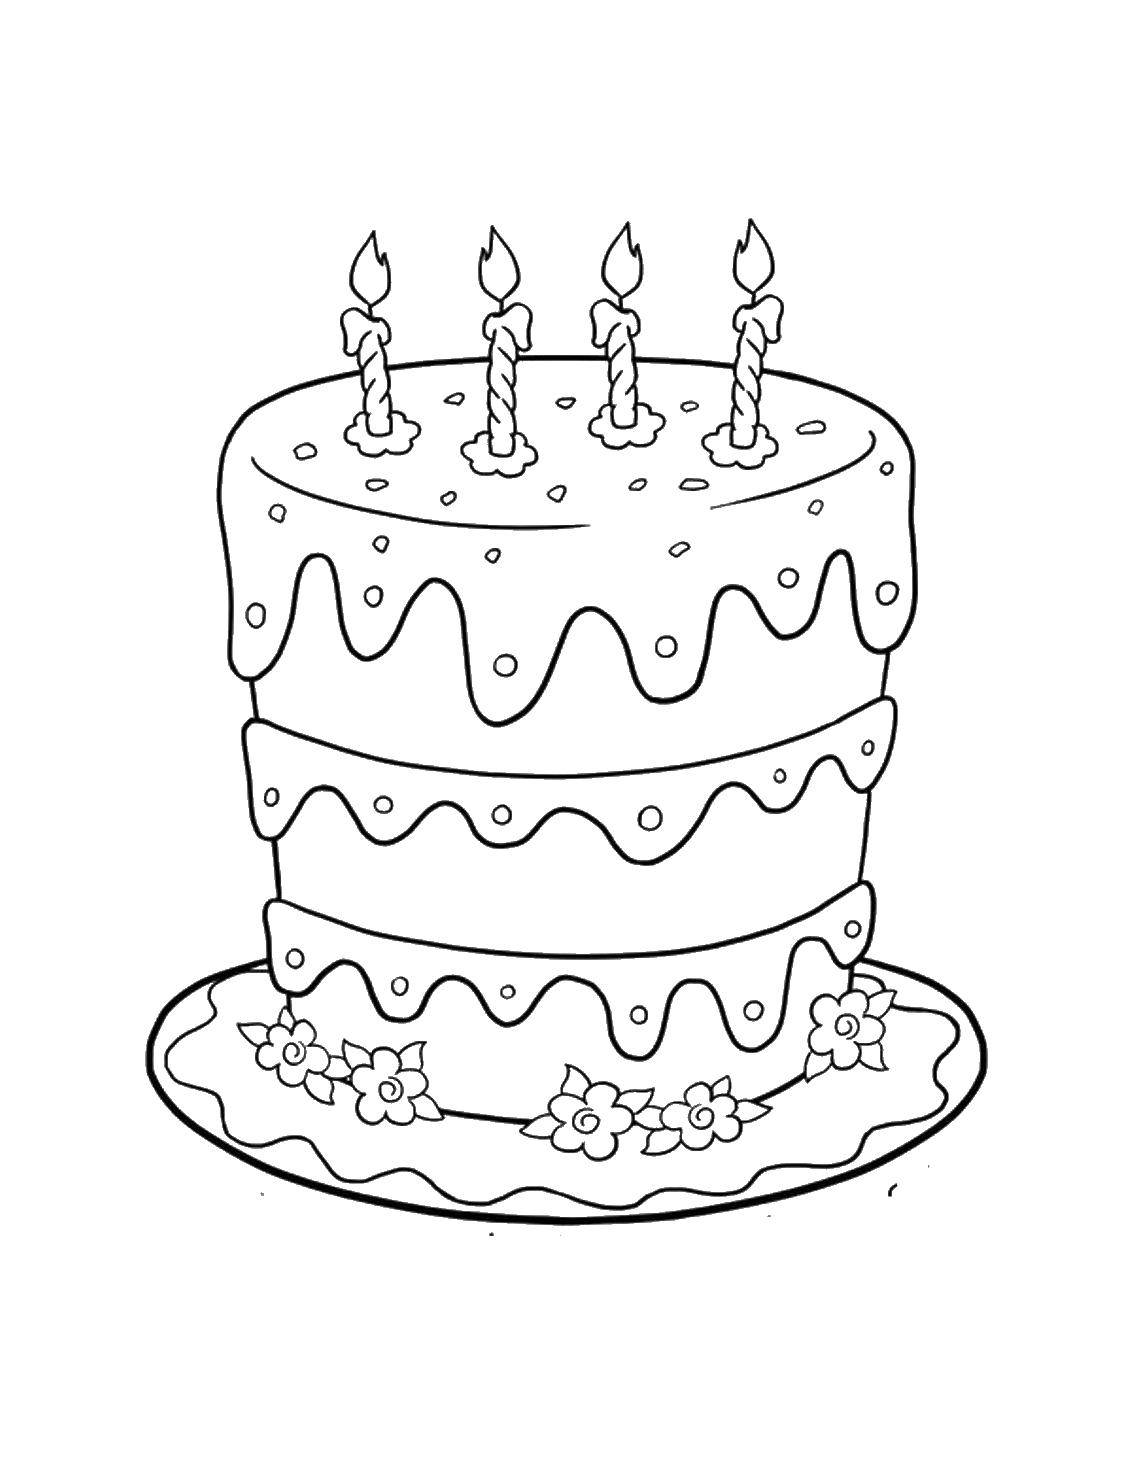 Coloring High cake with candles. Category cakes. Tags:  Cake, food, holiday.